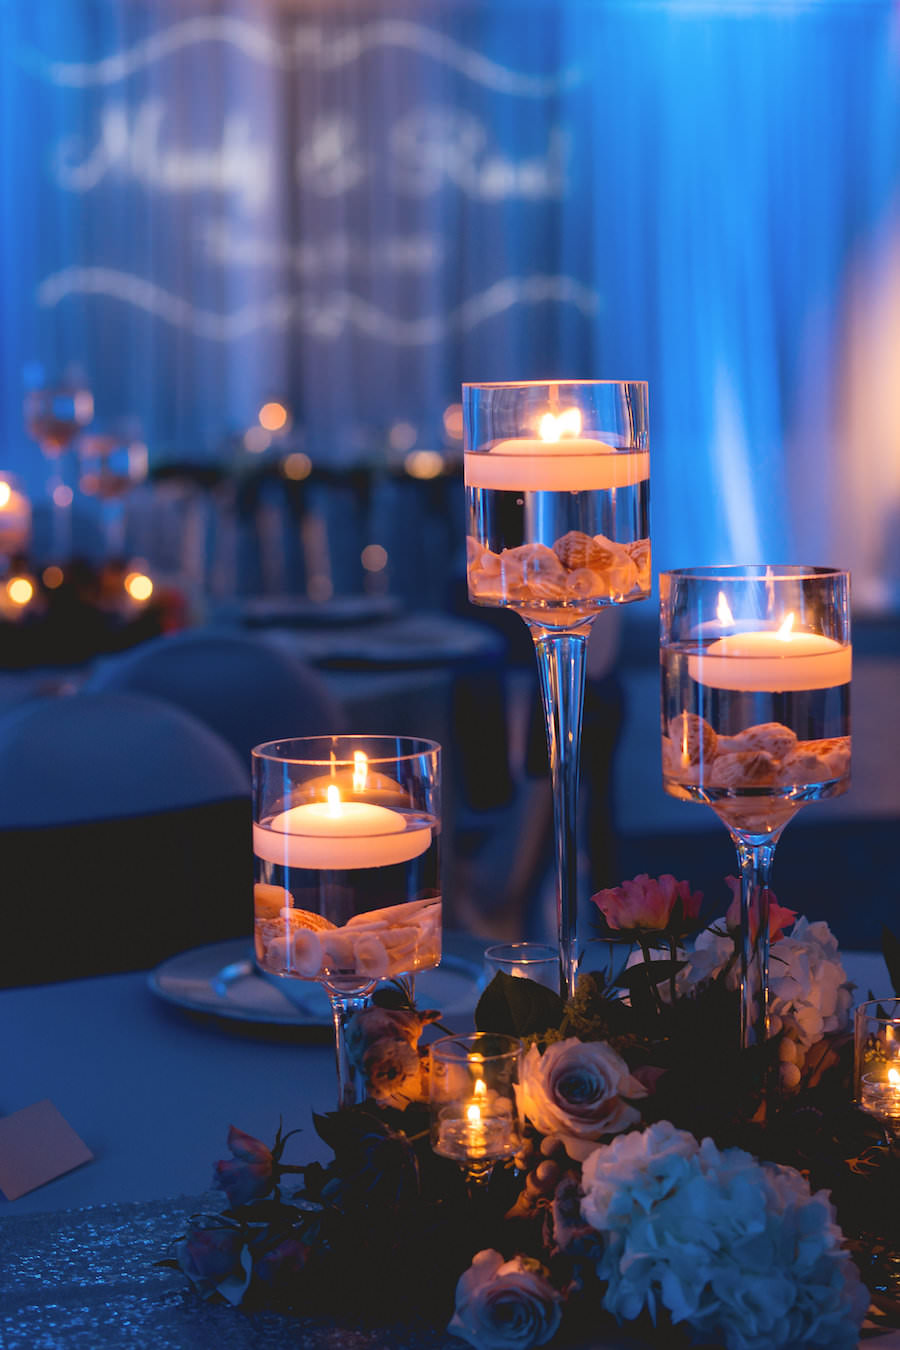 Wedding Reception Table Setting with Floating Candle and Floral Centerpiece | Tampa Bay Wedding Venue Bay Harbor Hotel